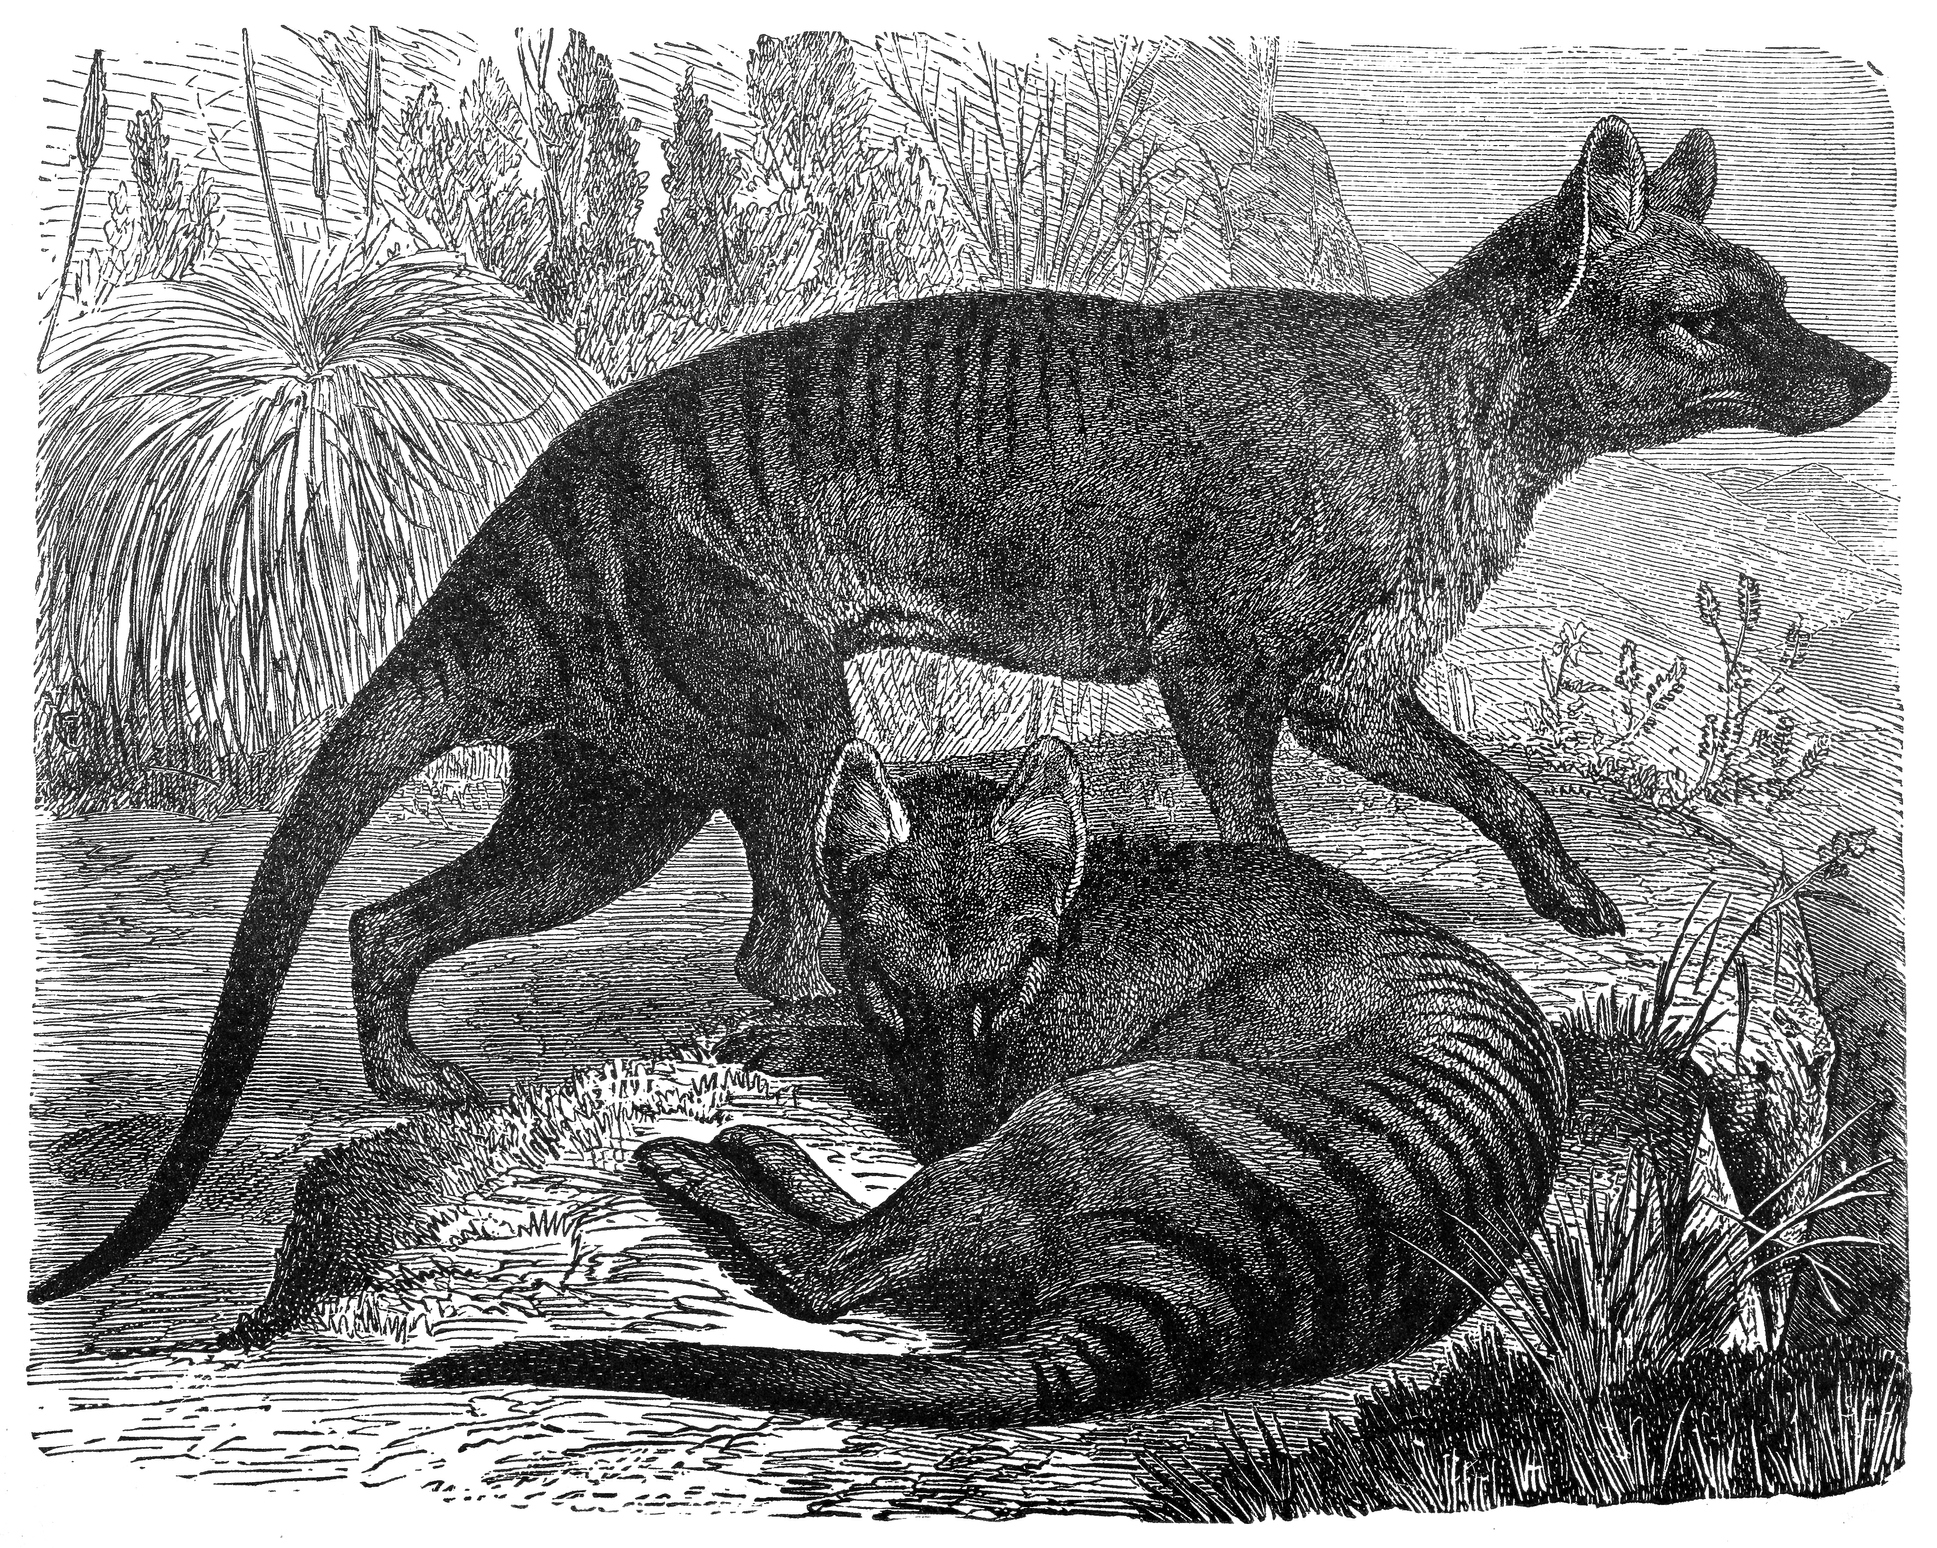 Odds that Tasmanian tigers are still alive are 1 in 1.6 trillion